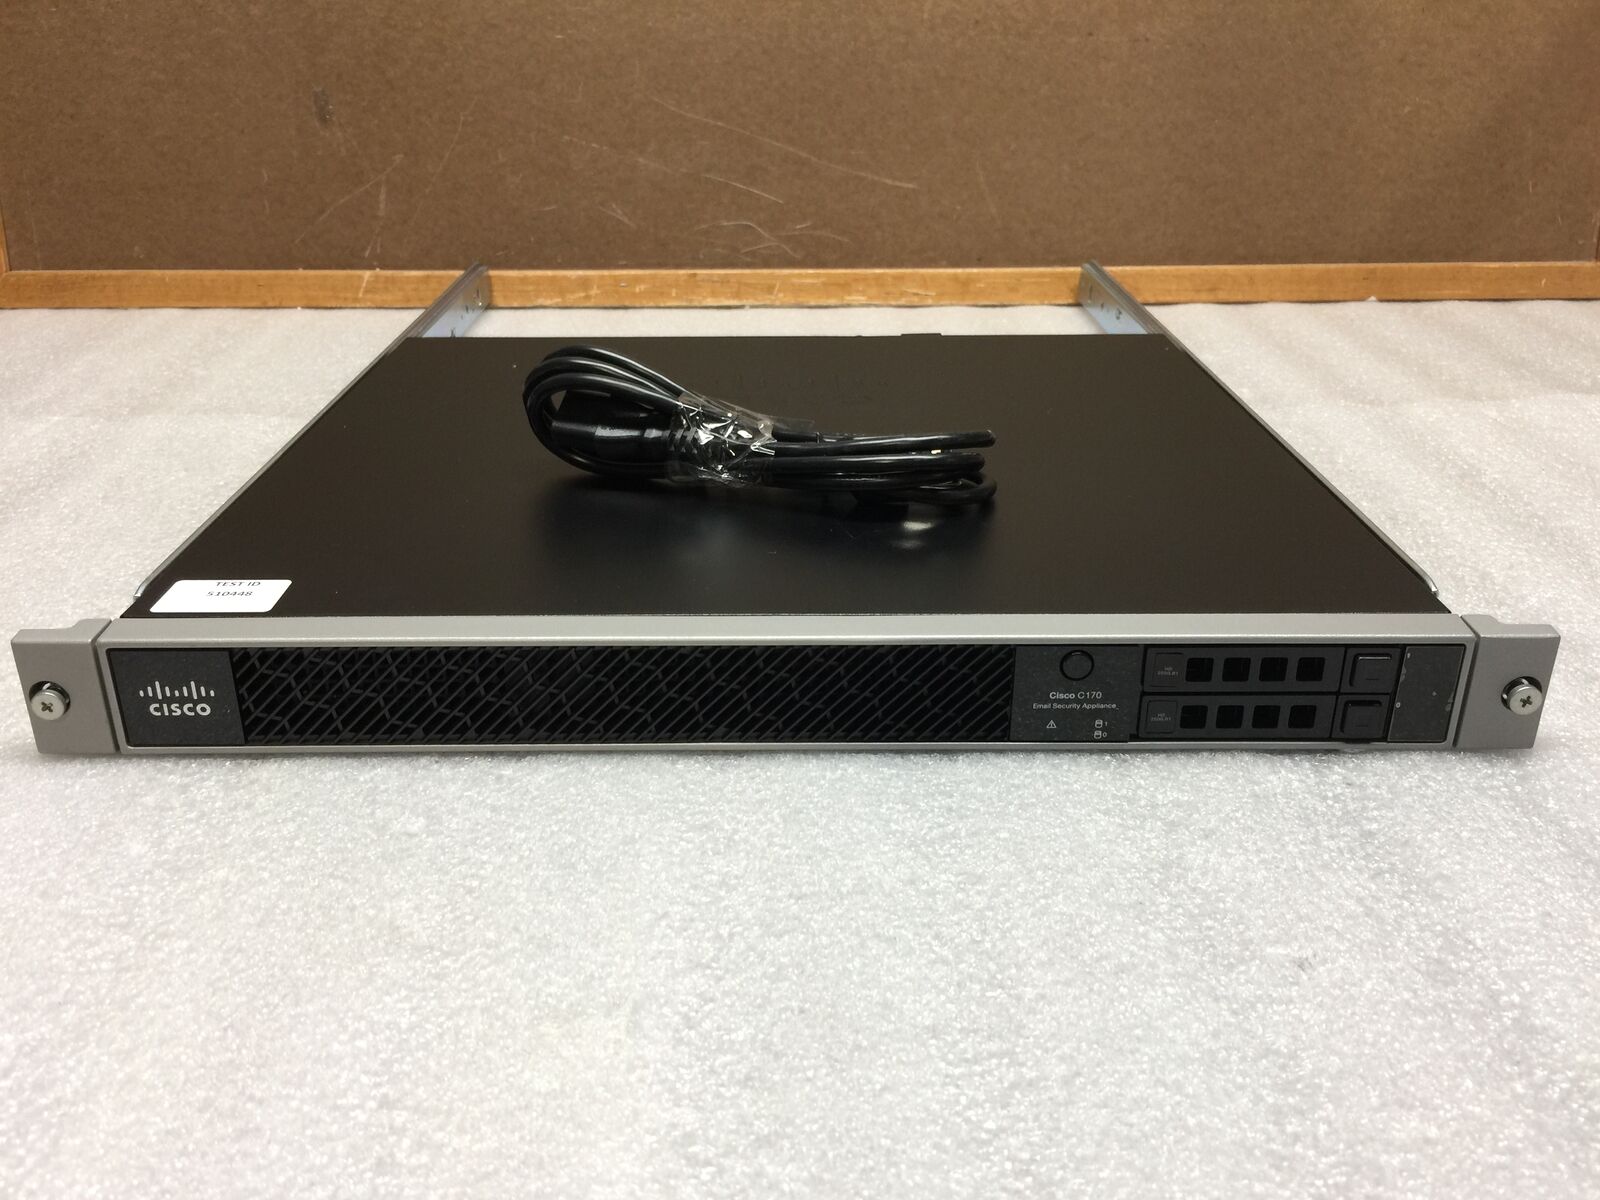 Cisco IronPort C170 MRSA Email Security Appliance w/ Mount & Power Cord - No HDD